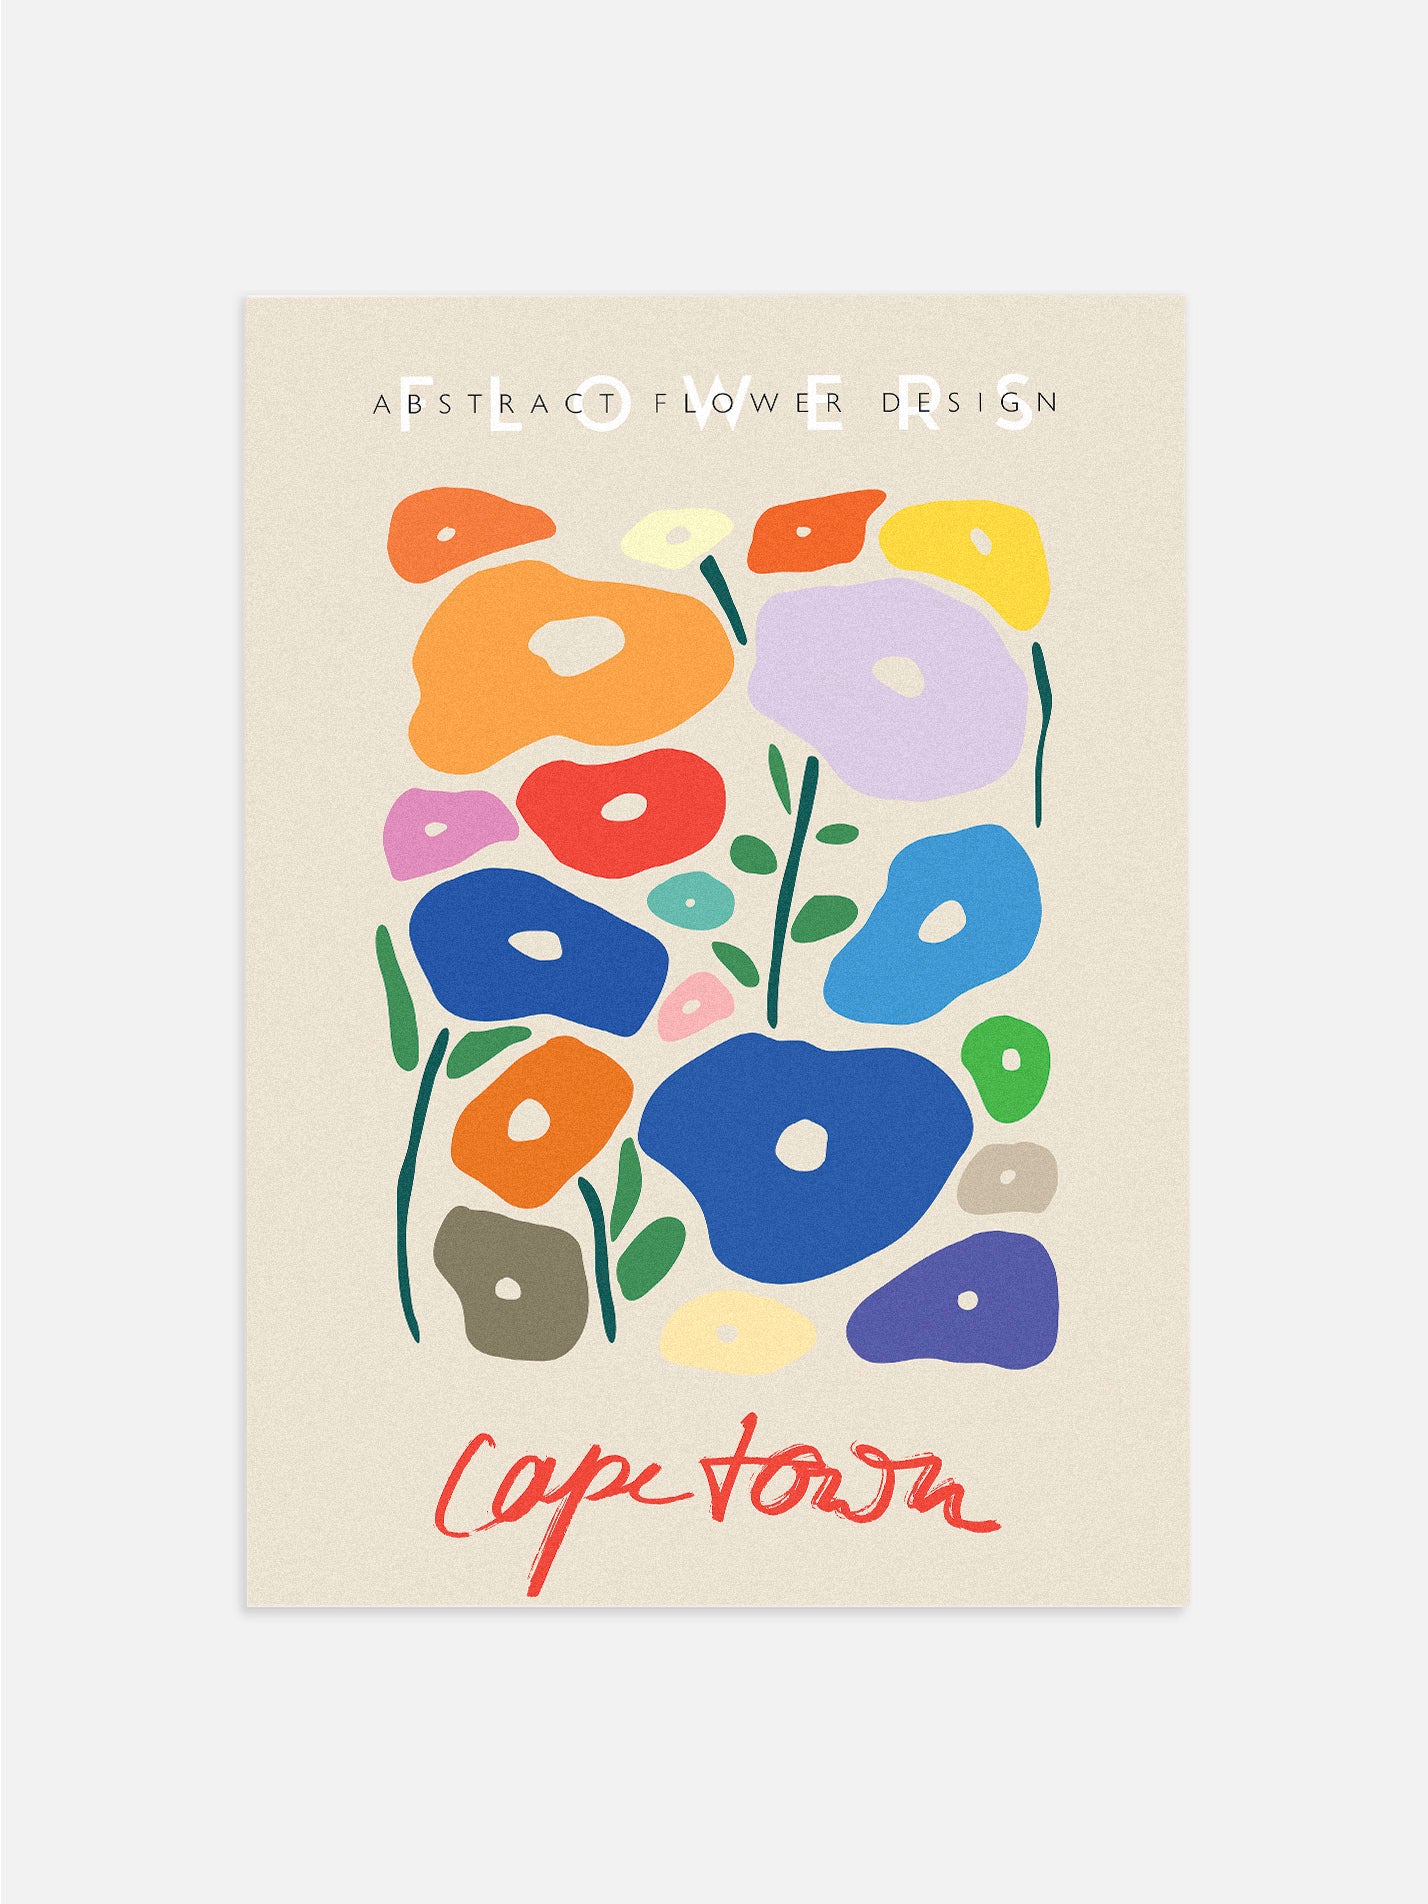 Capetown Flowers Poster